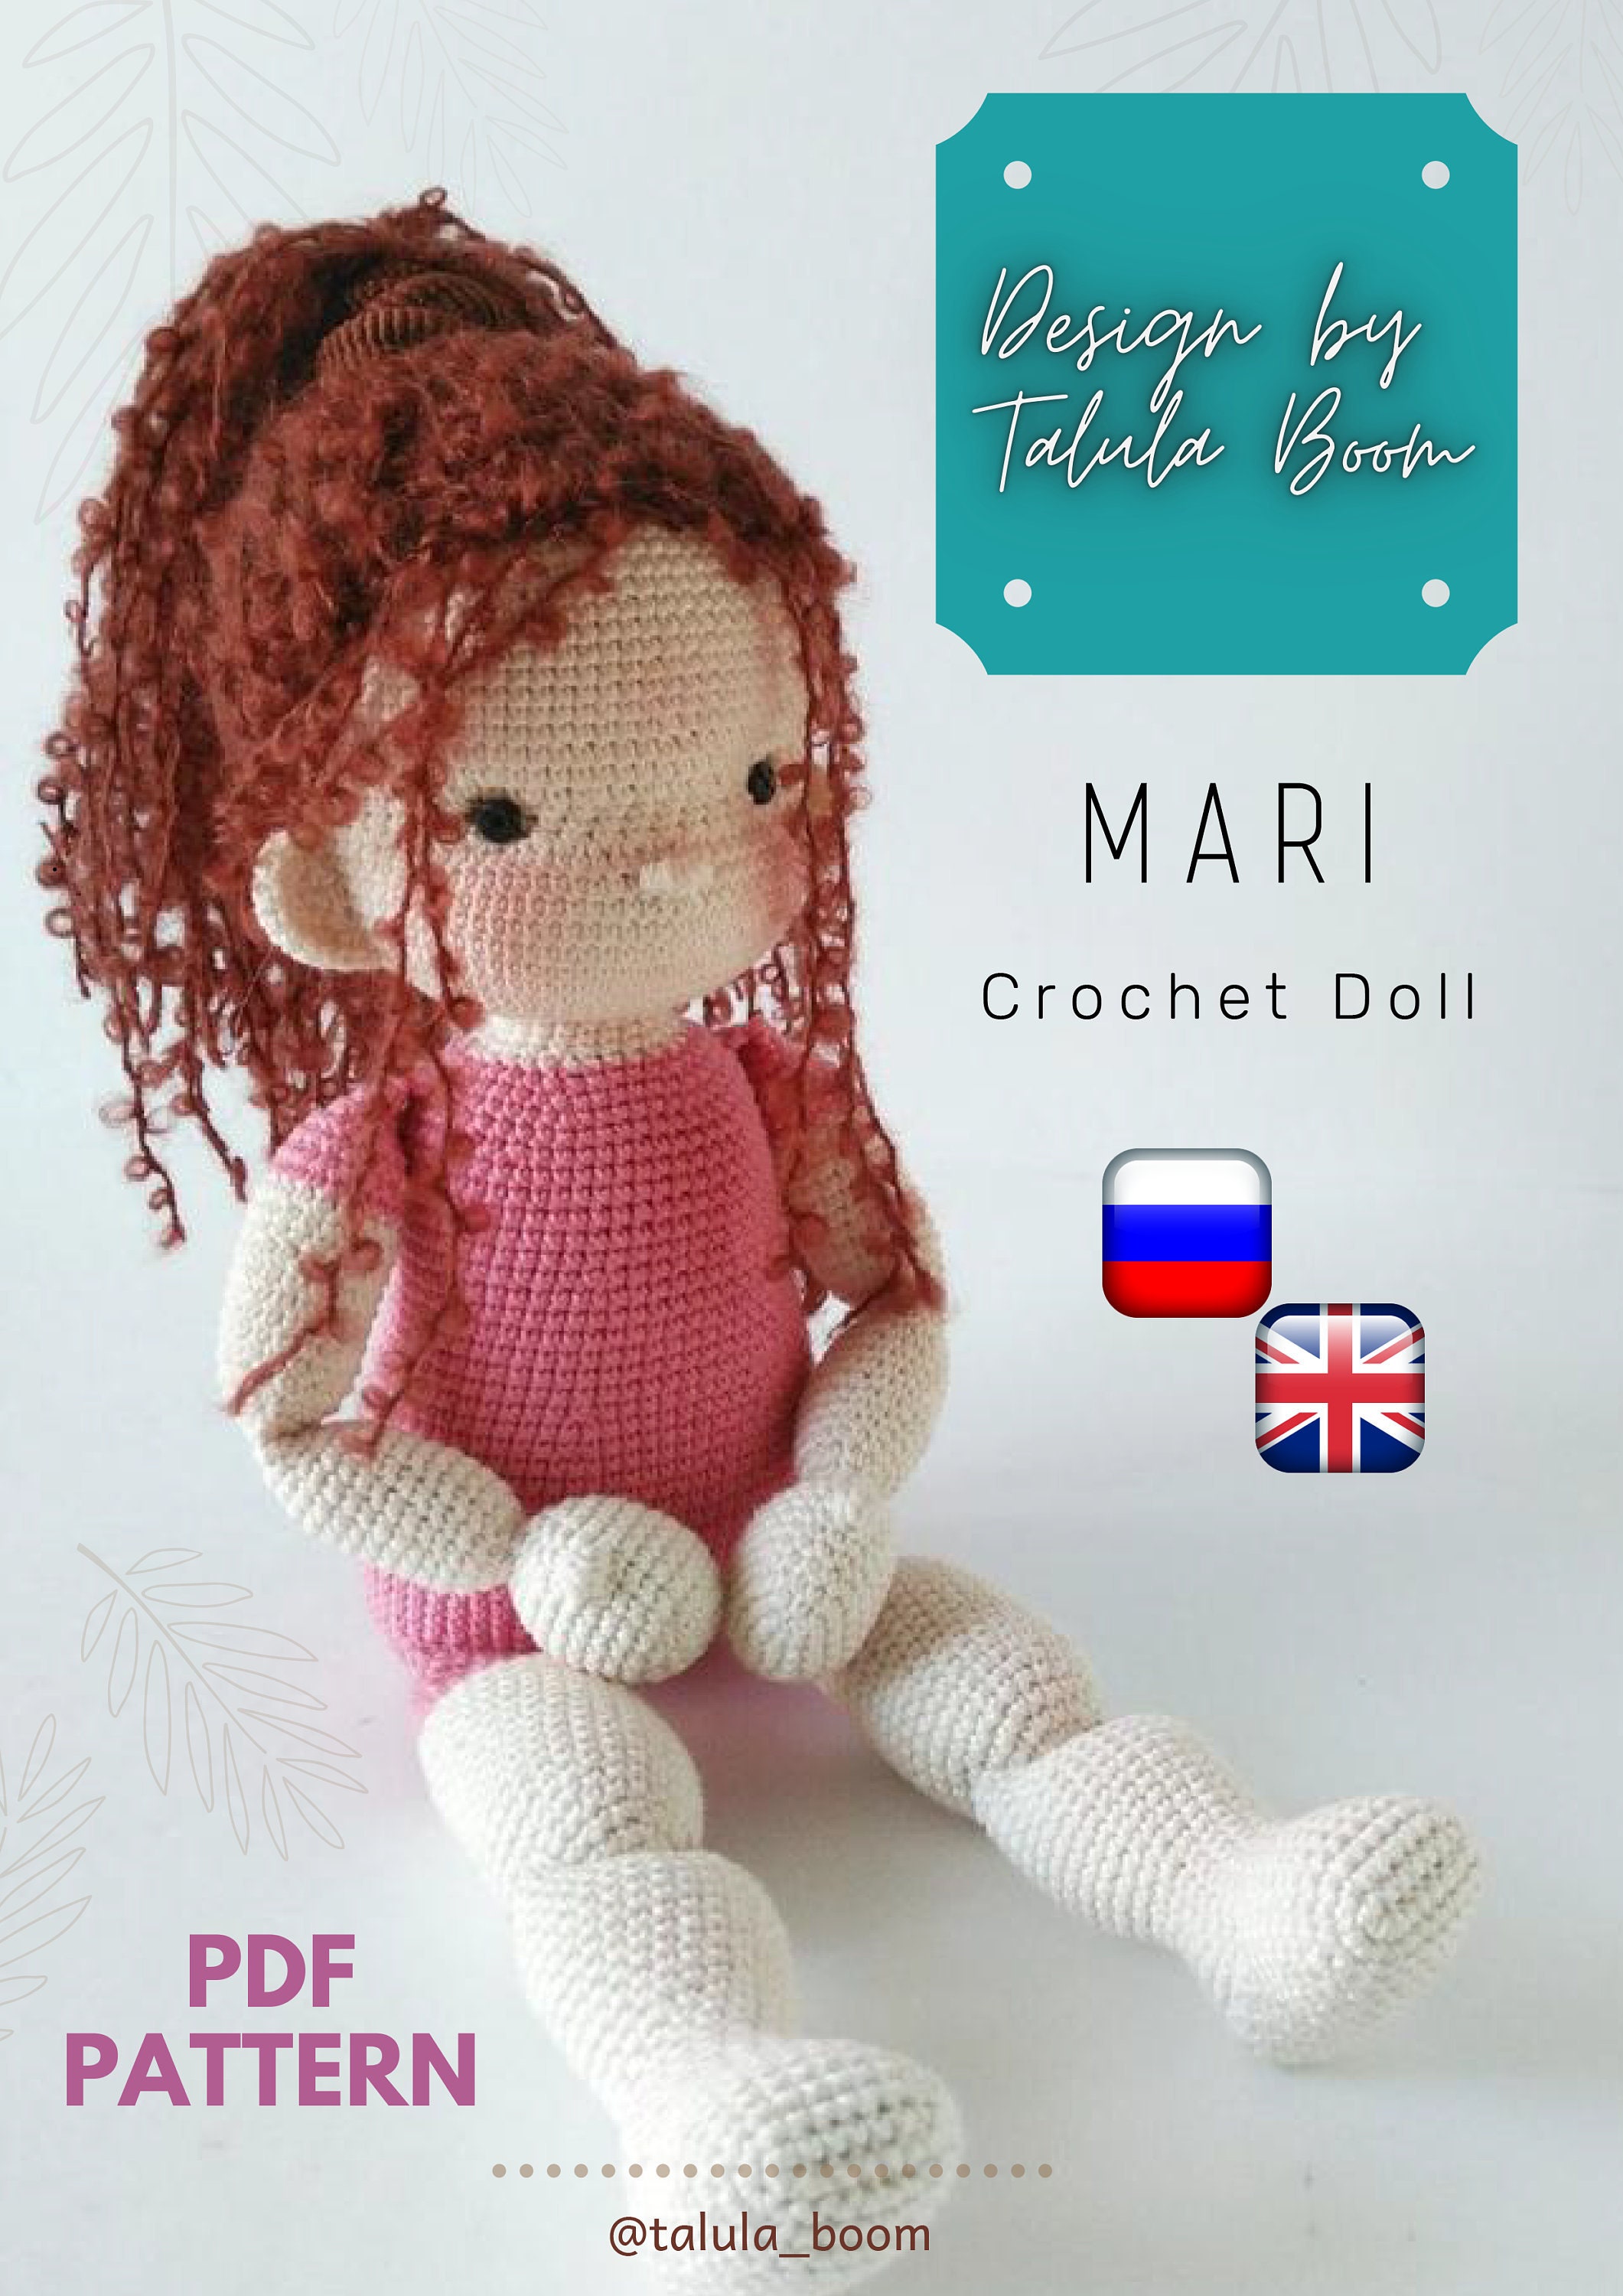 Doll Hoodie Crochet Pattern PDF Pattern MOTHERS day PDF Crochet Doll Pattern for 5 inch Doll,Crochet Baby Doll Pattern for Dress and Cape